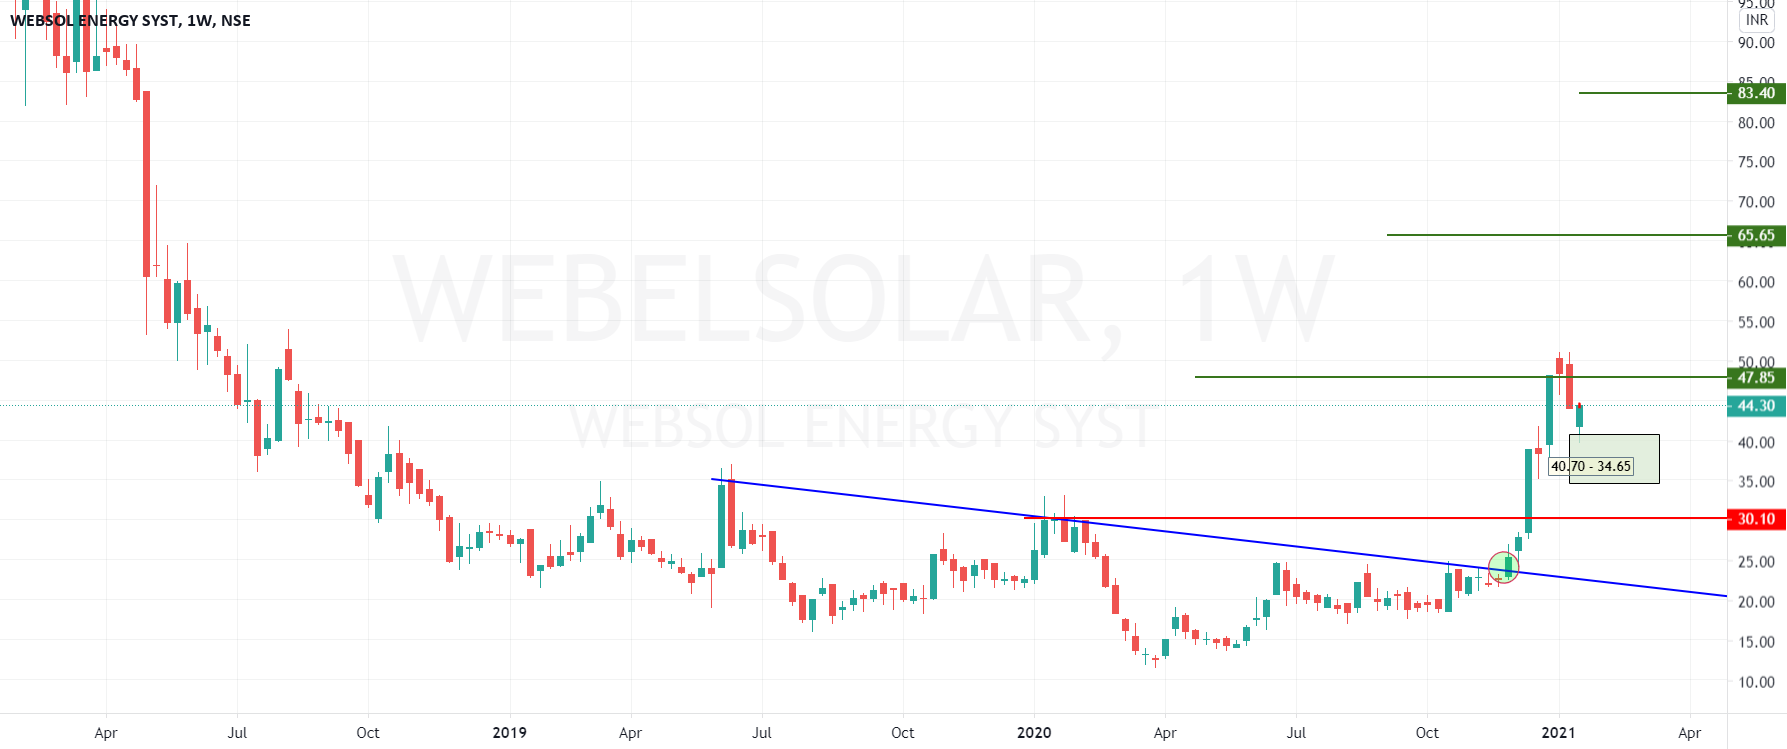 Reasons Why the Websol Share Price Will Soar in 2019